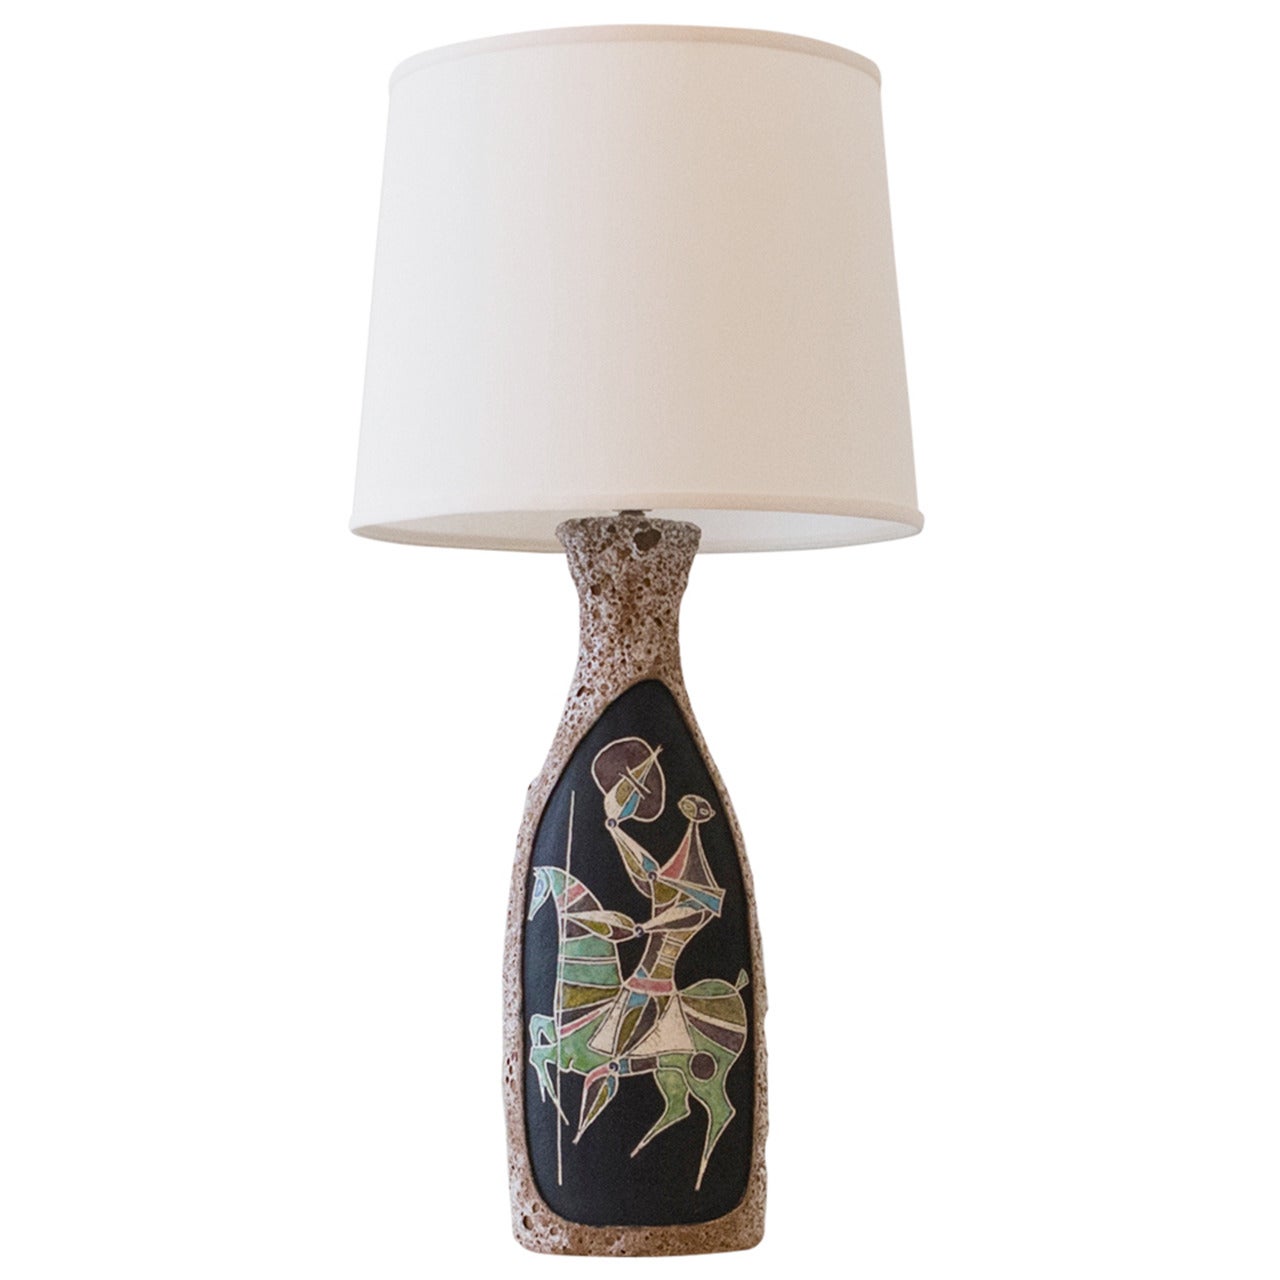 Hand-Painted and Signed Fantoni Table Lamp from the 1950s For Sale